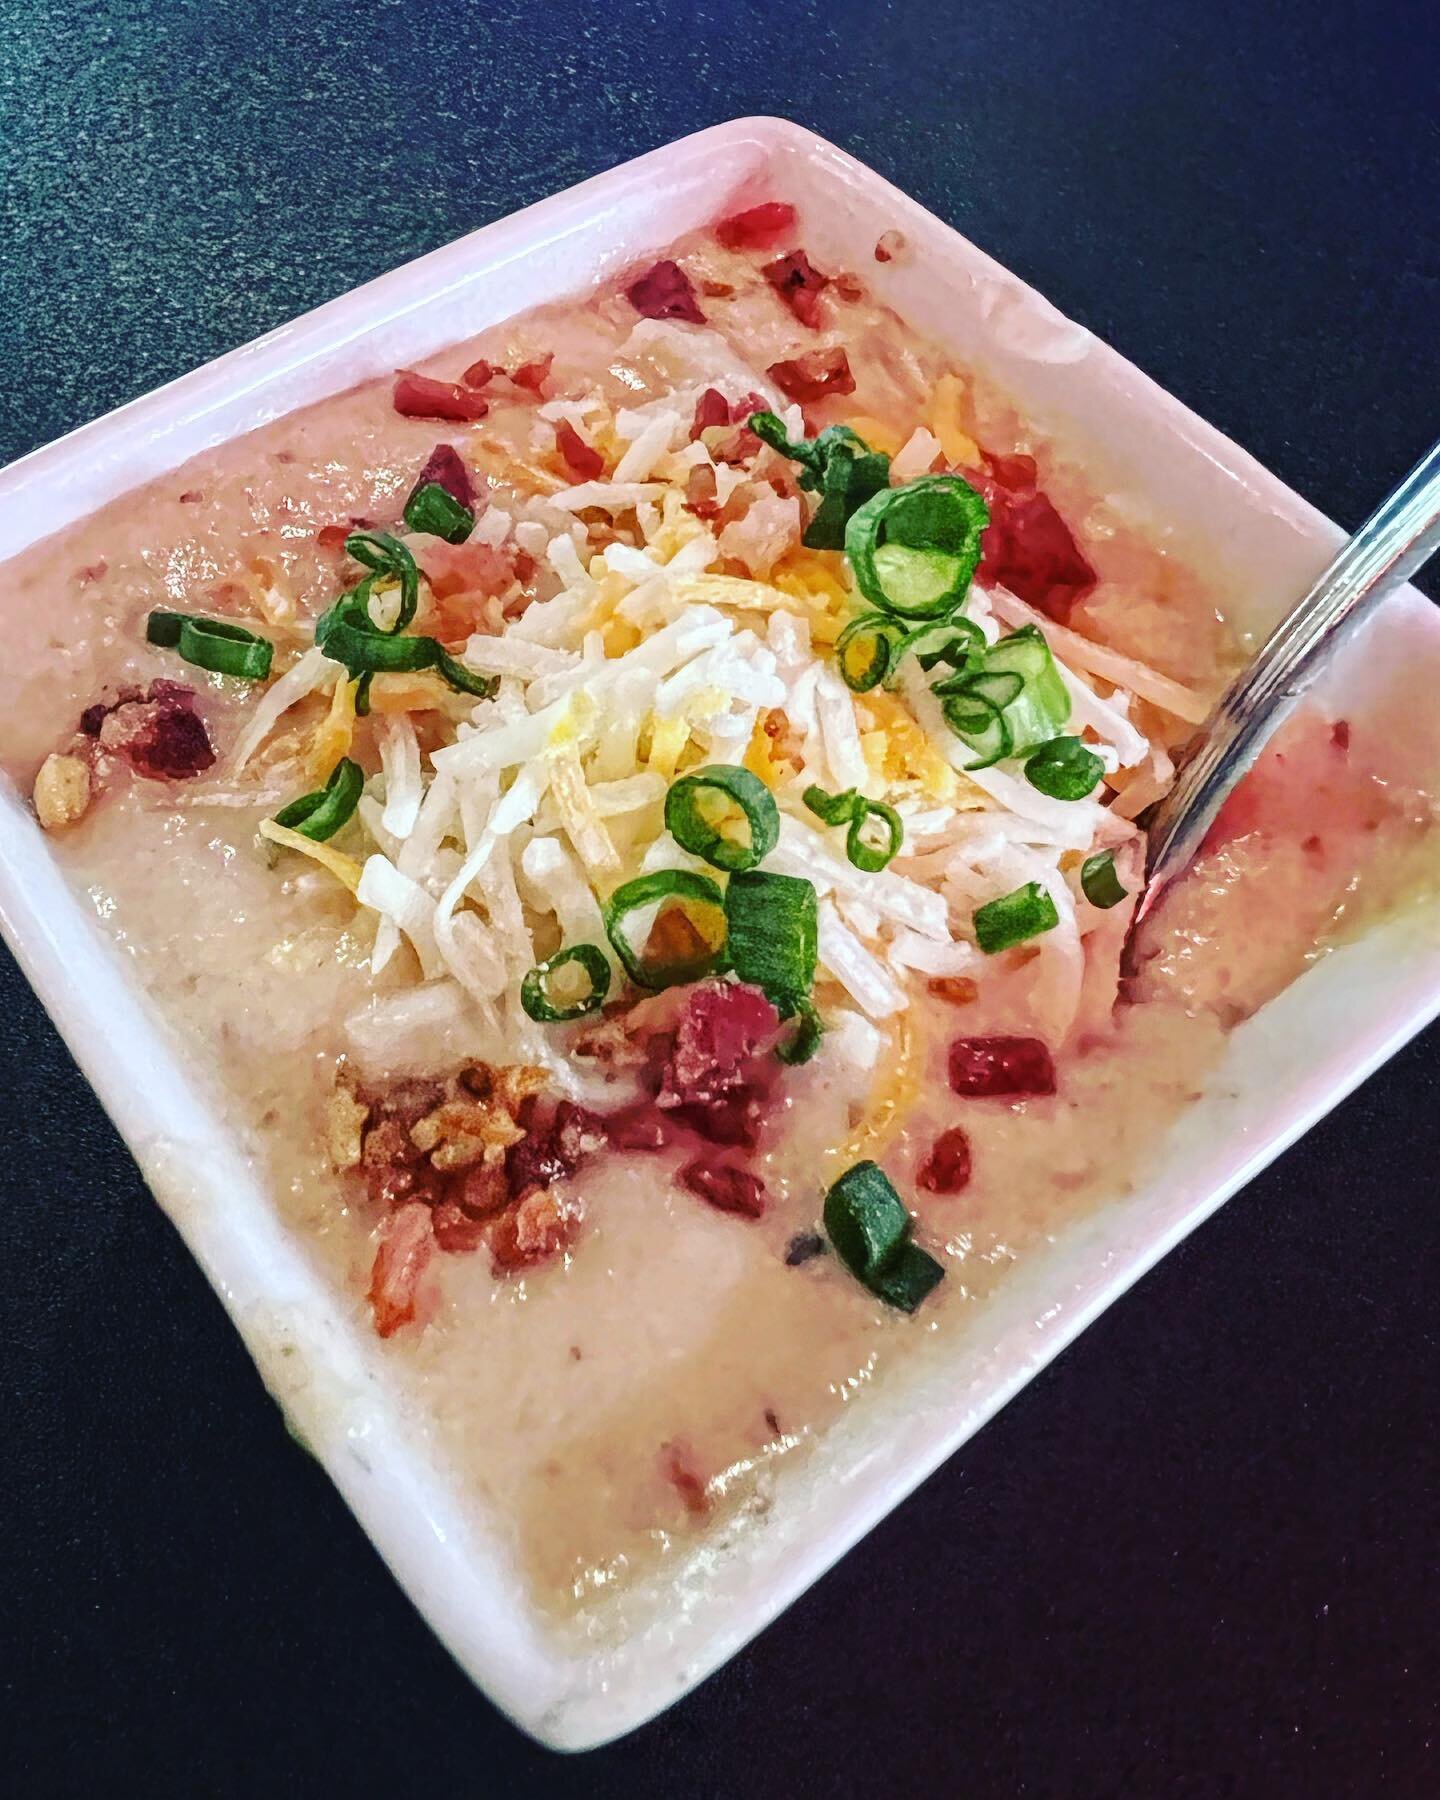 Loaded POTATO SOUP going LIVE TODAY!! @the_danielle_britt recipe and it&rsquo;s loved by everyone!!!! 

#theloungegvl #greenville360 #drinks #drinklocal #bar #club #music #greenvillesc #southcarolina #cocktails #greenvilledowntown #womenentrepreneurs